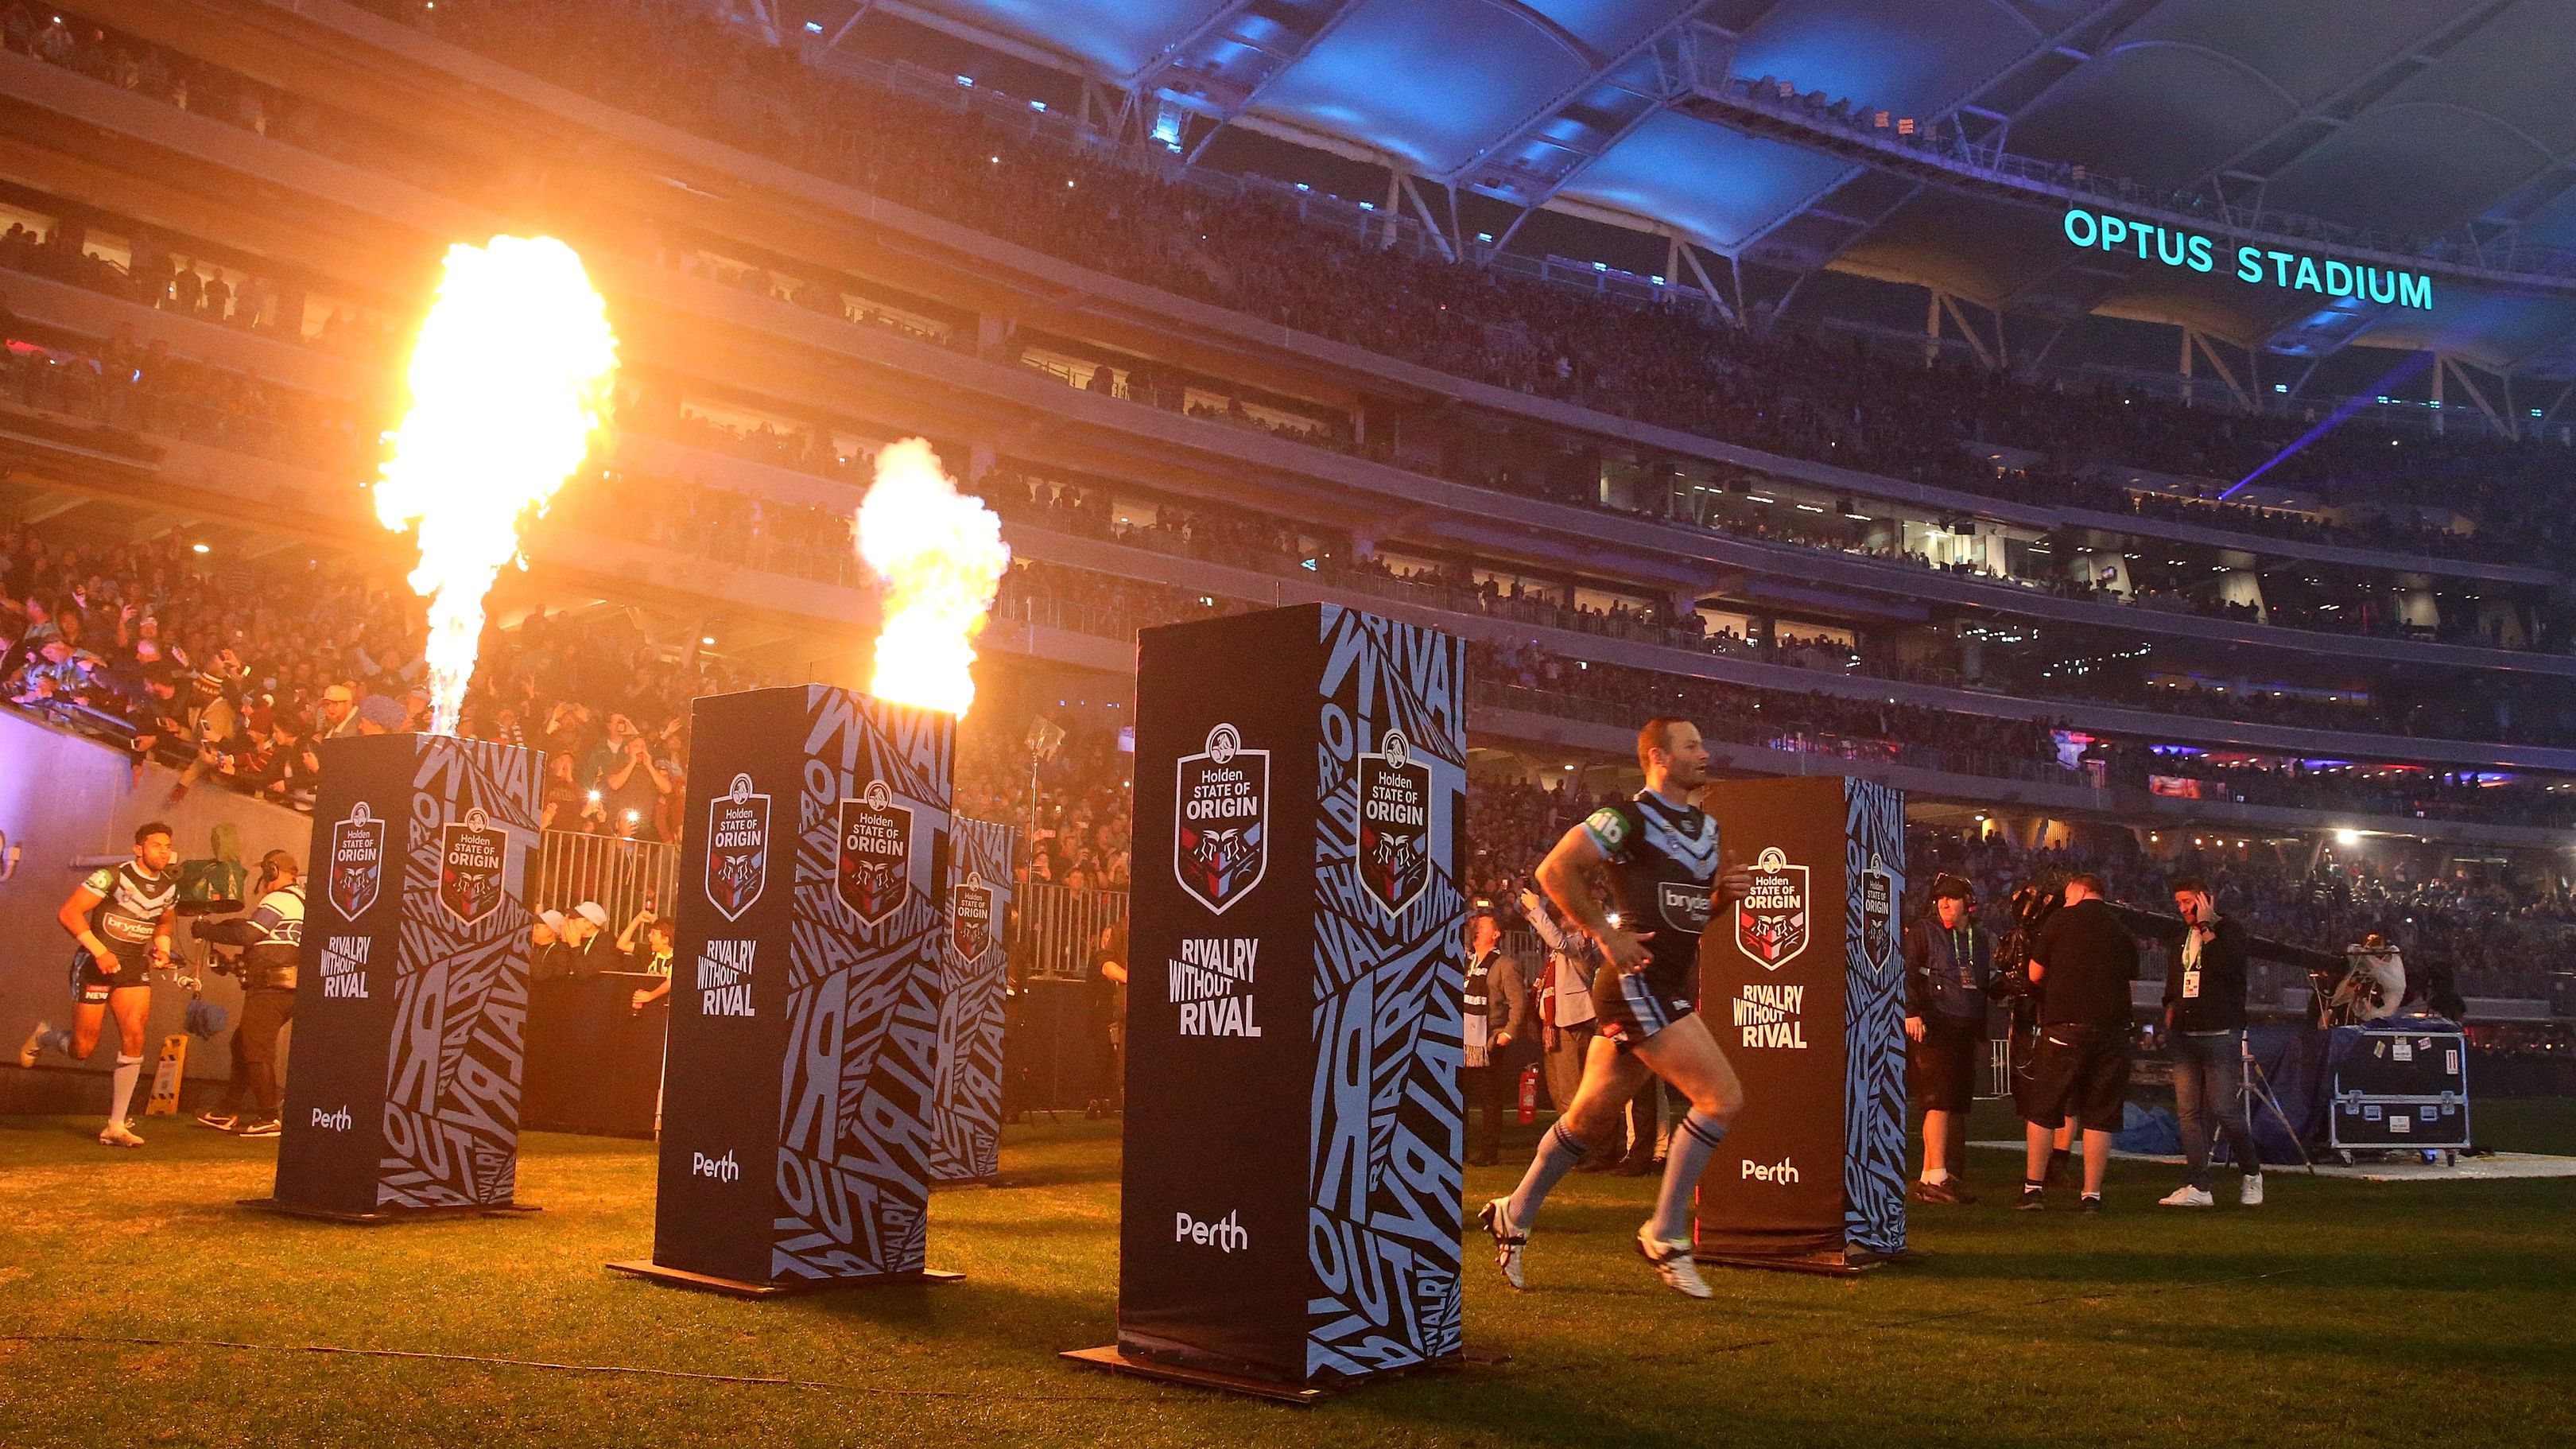 Boyd Cordner of New South Wales leads the team onto the field during game two of the 2019 State of Origin series between the New South Wales Blues and the Queensland Maroons at Optus Stadium on June 23, 2019 in Perth, Australia. (Photo by Paul Kane/Getty Images)